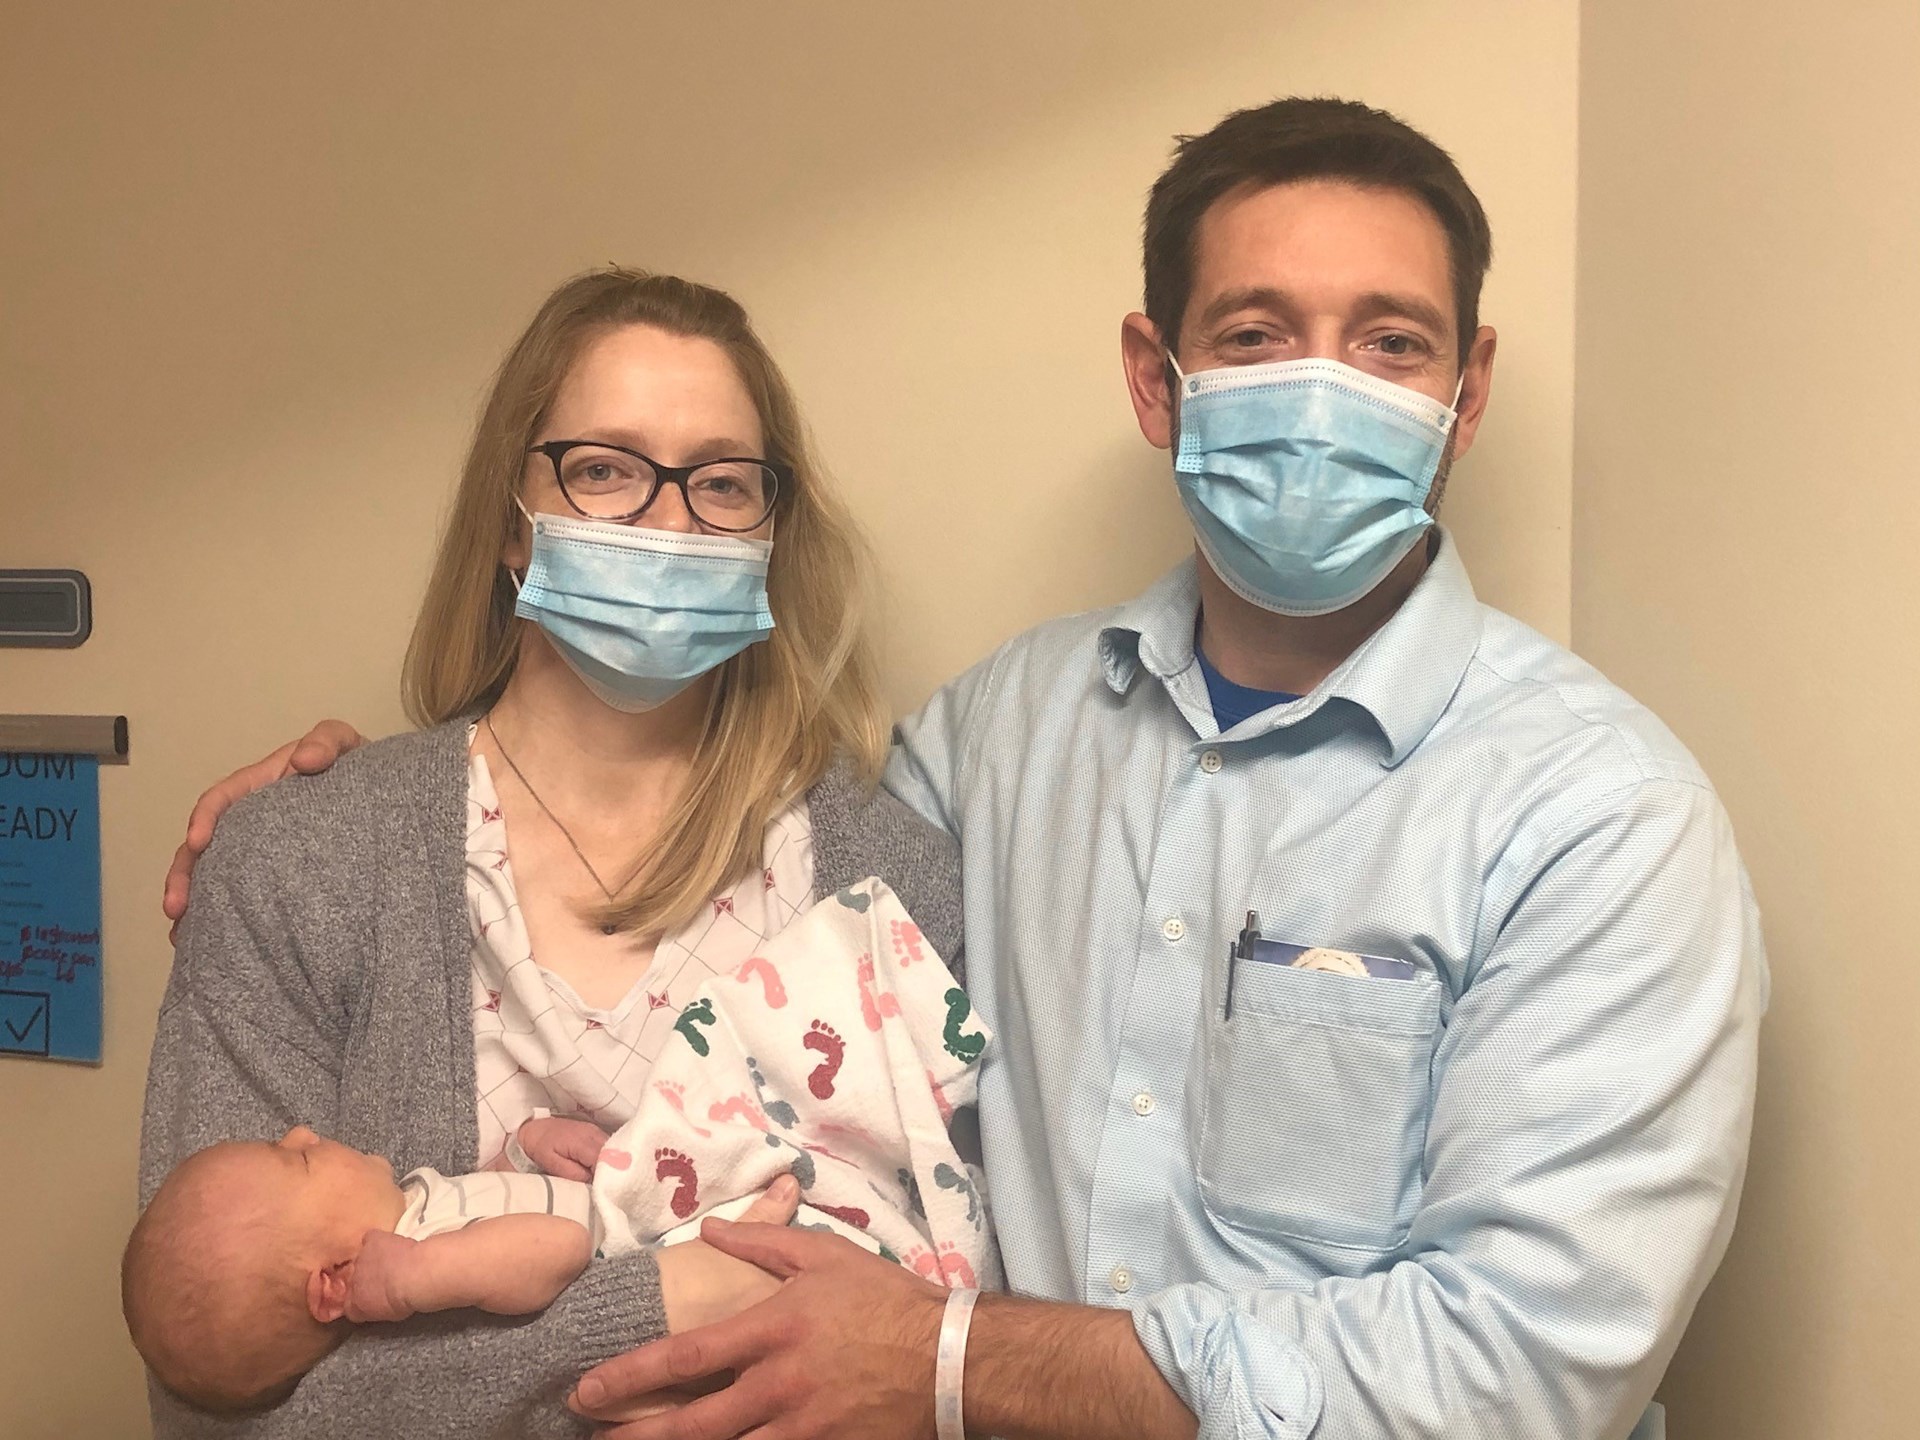 Baby Mary, with her parents Emma and Eddie, was the recepient of $100 donated by another WellSpan Chambersburg Hospital "baby," who was born 60 years before her.